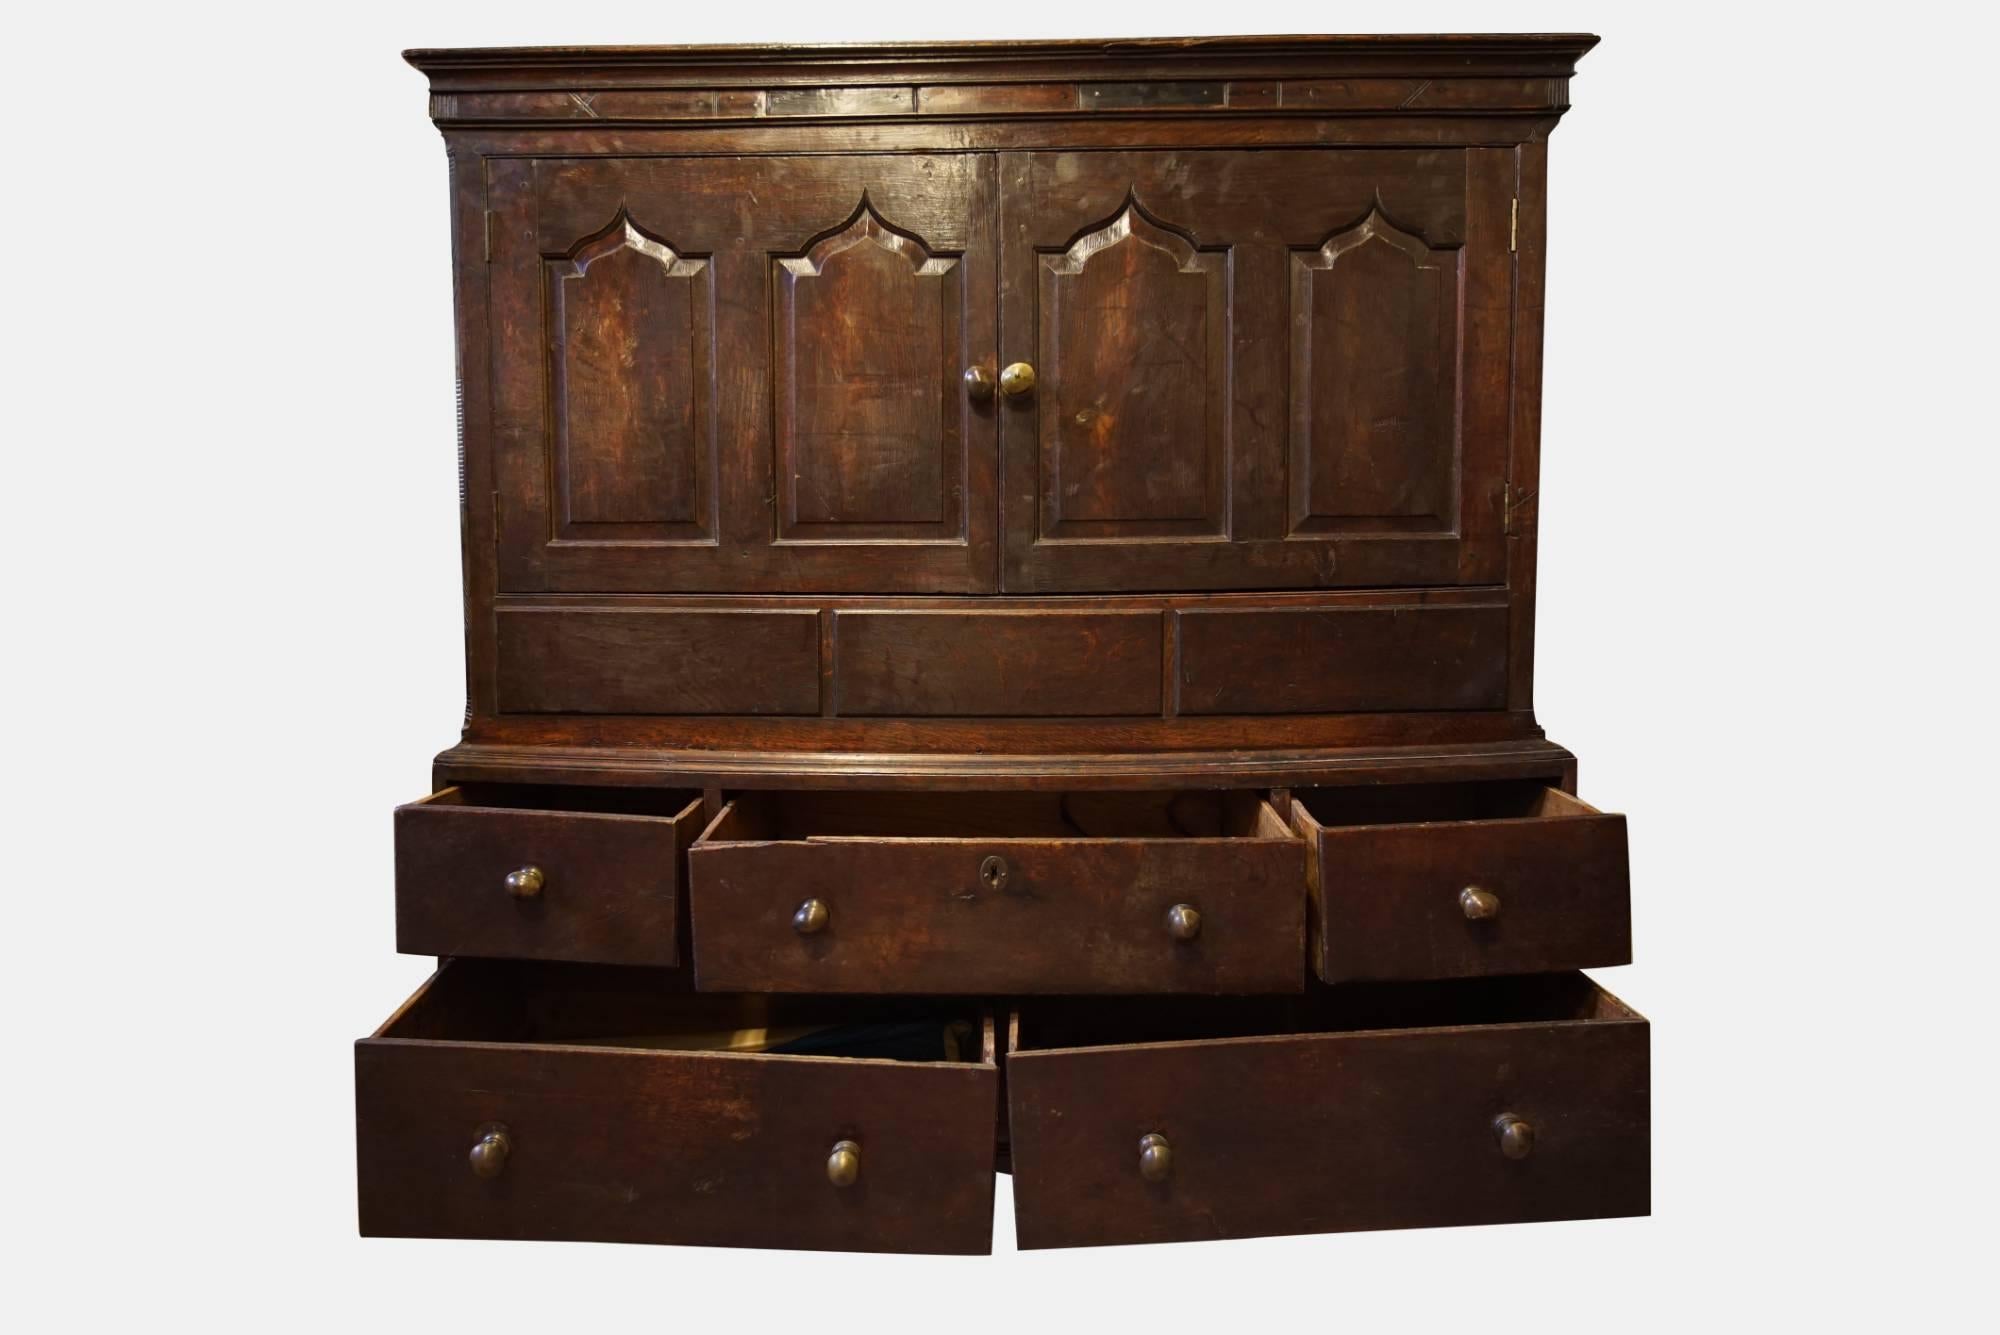 A Welsh oak livery cupboard, comprising 2 panelled doors over 3 false drawers and an arrangement of 5 drawers under, standing on bracket feet,


circa 1720.